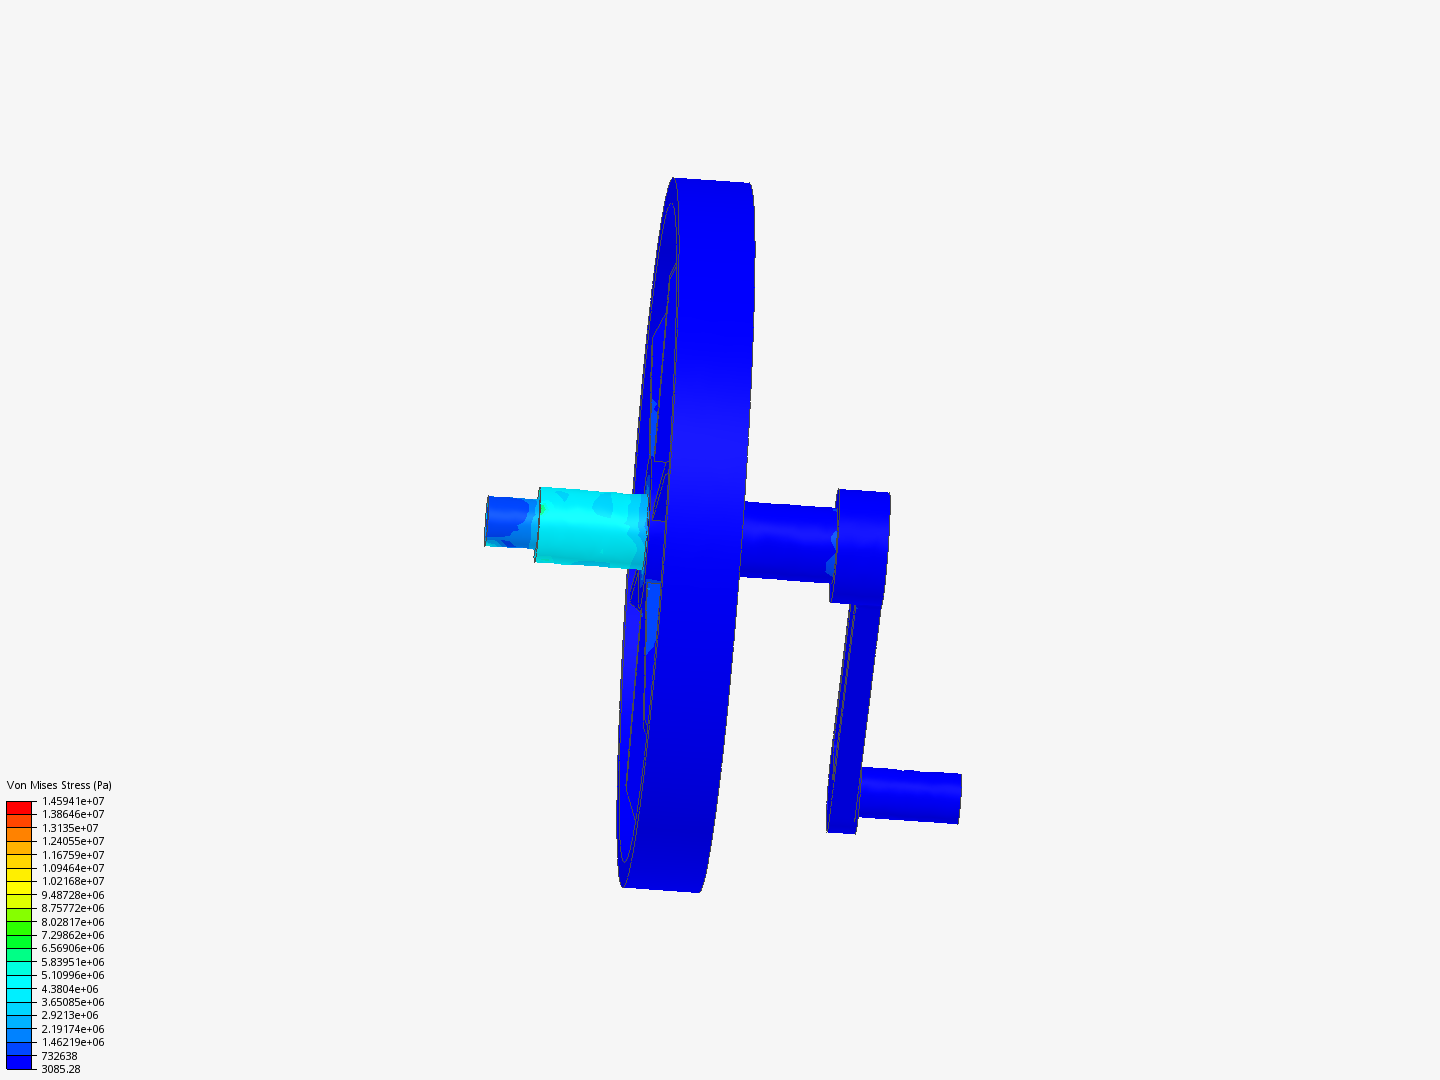 Practical Exam: Simulation of a Crank Assembly - Copy image